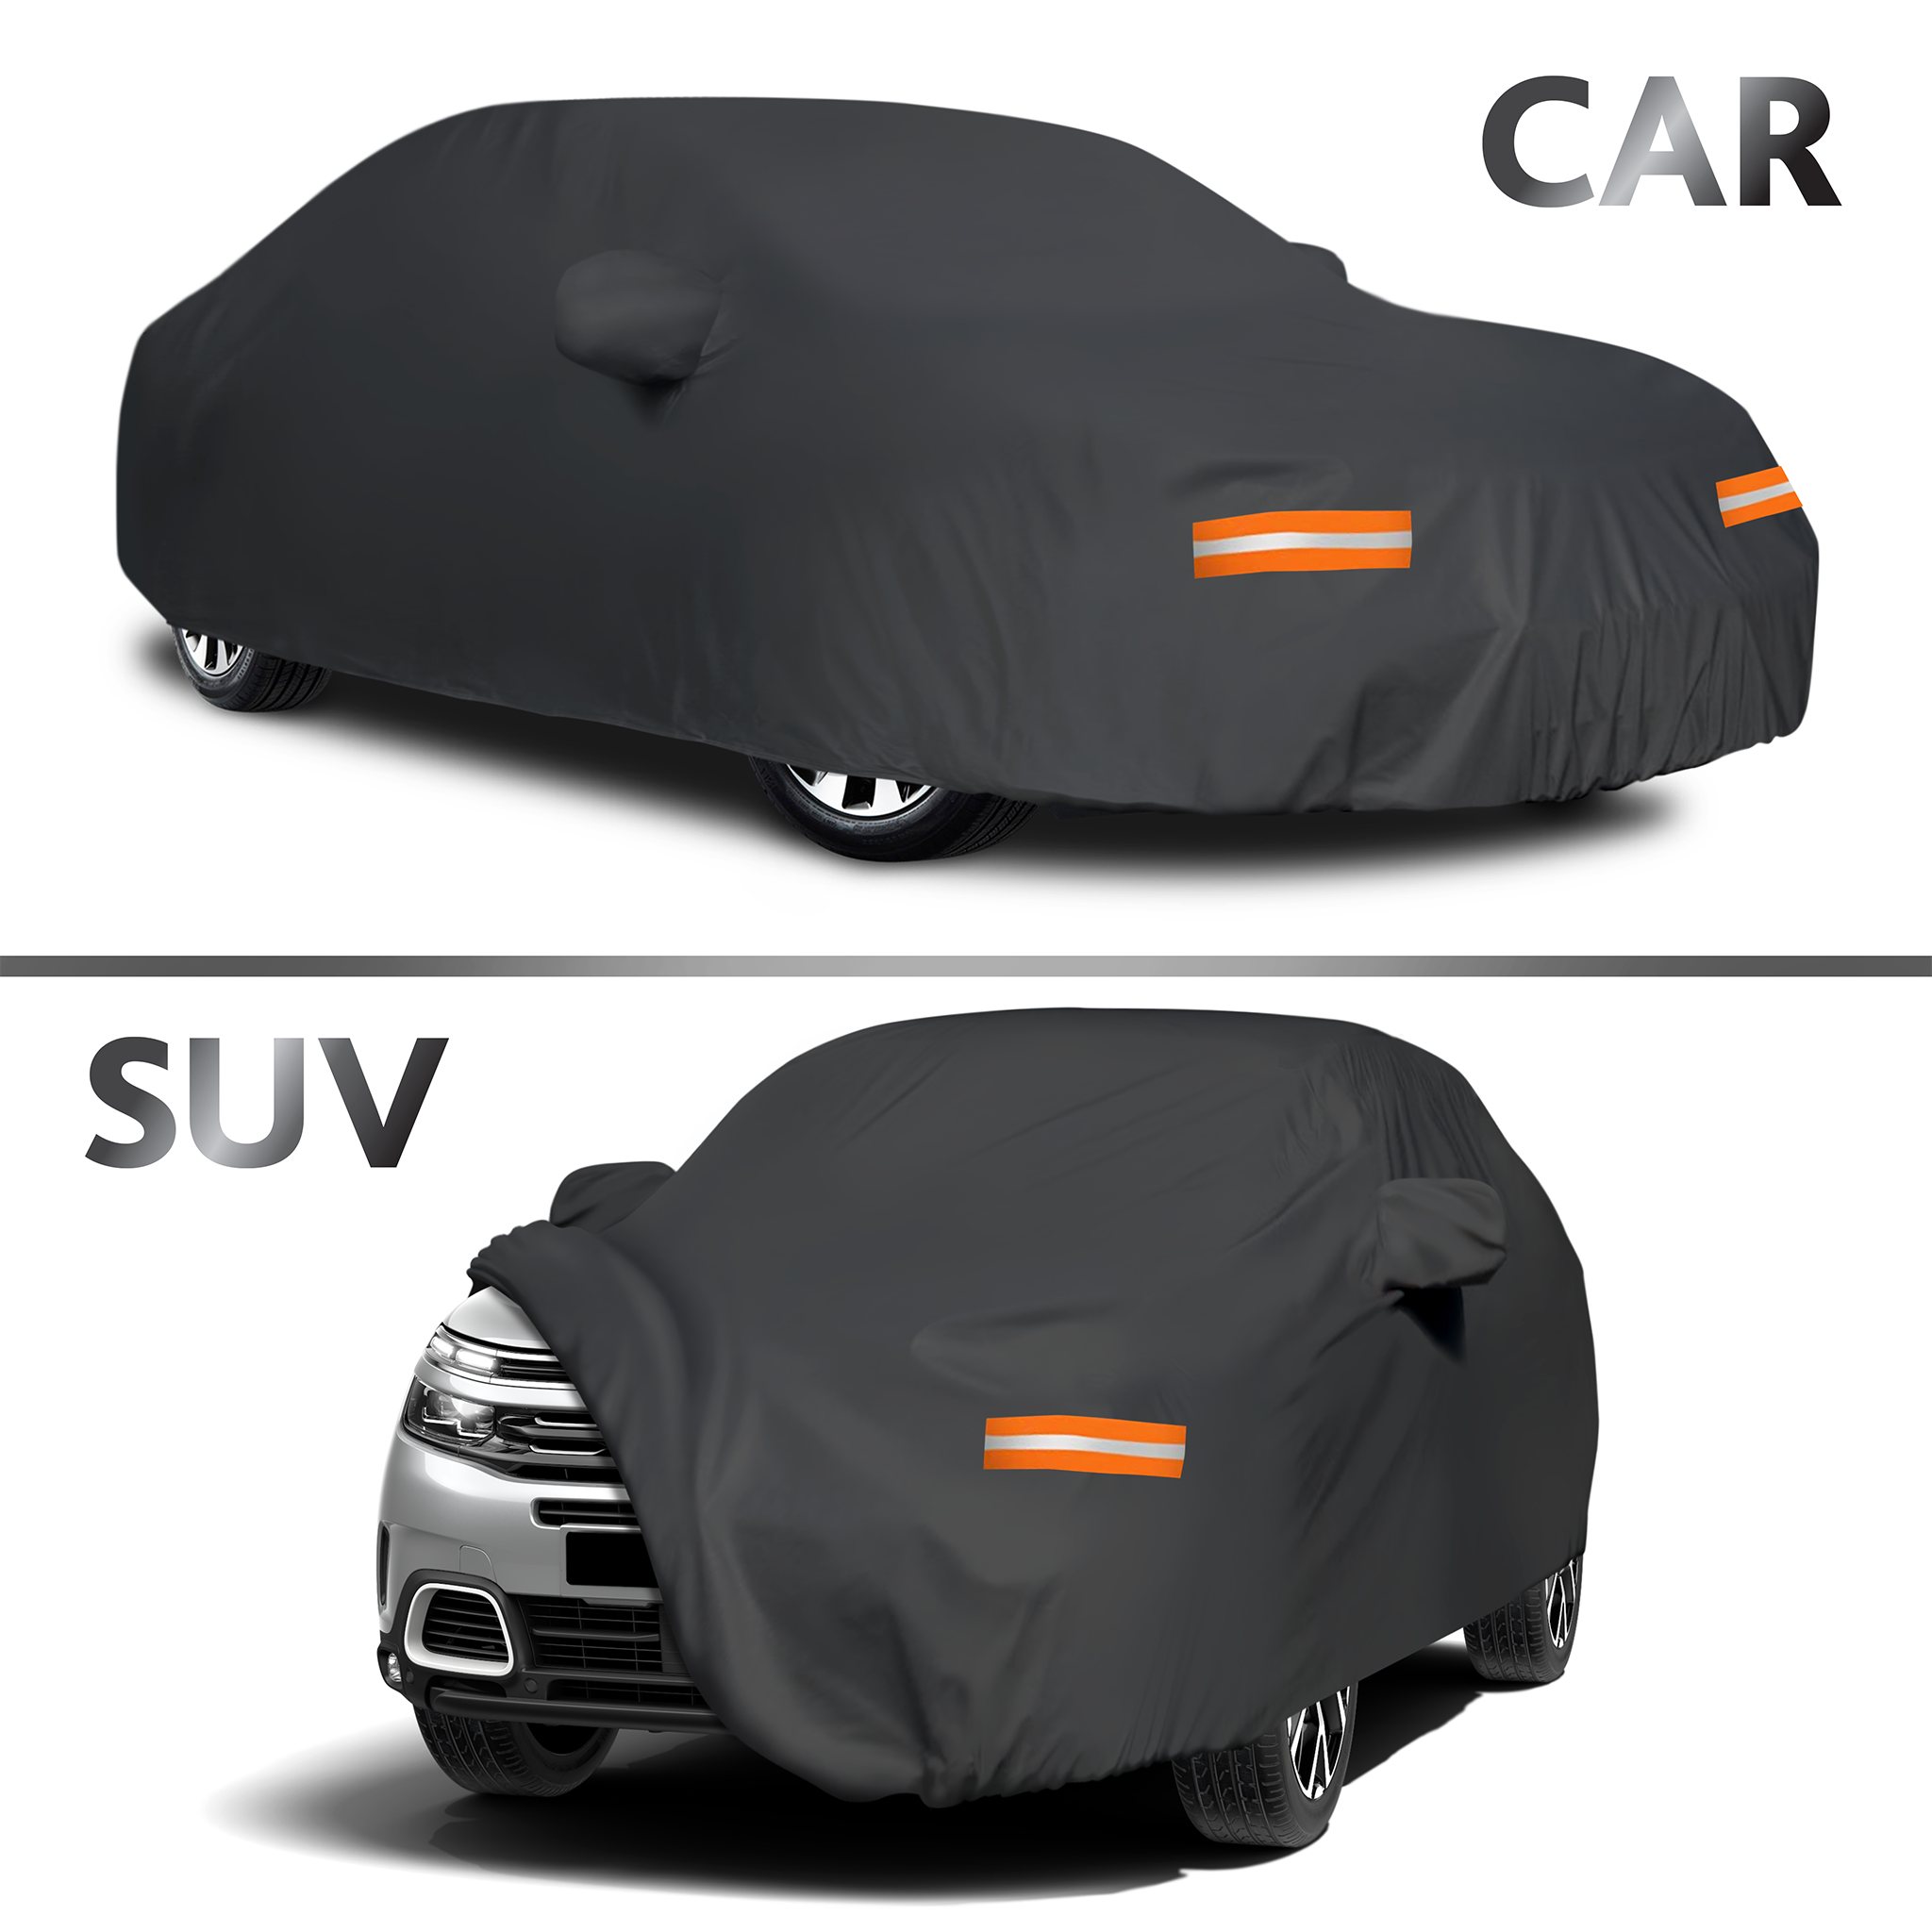 Mockins 190 in. x 75 in. x 72 in. Black Extra Thick Heavy-Duty Waterproof SUV Car Cover - 250 G PVC Cotton Lined